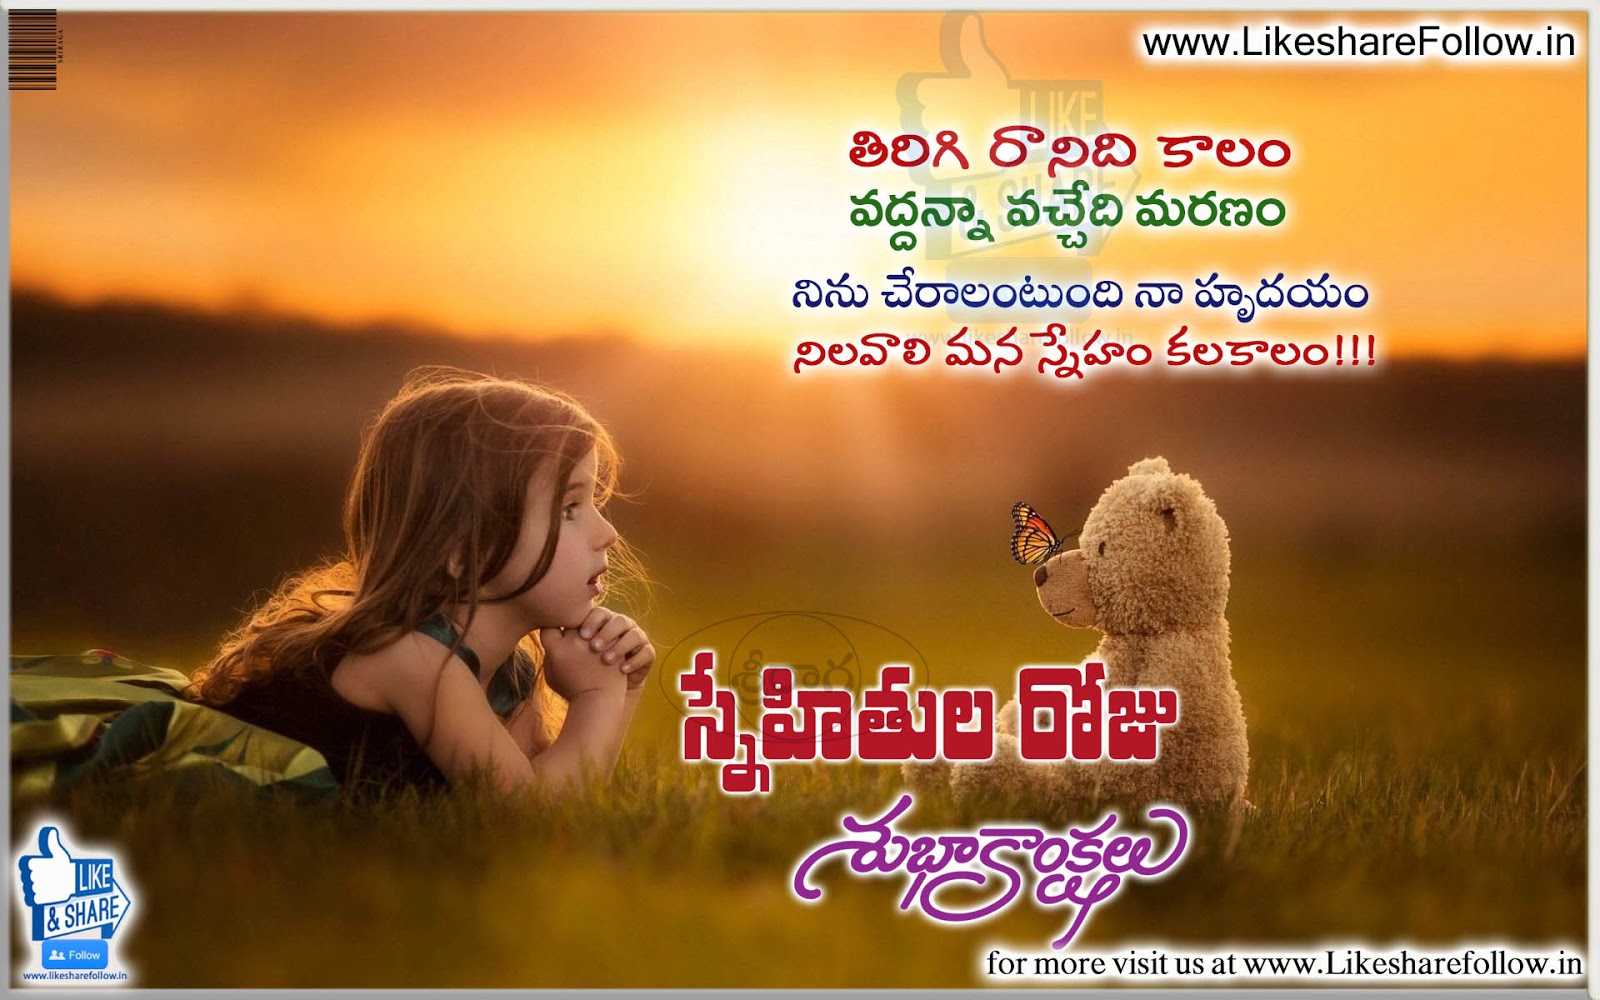 Telugu Friendship day wishes messages quotes | Like Share Follow